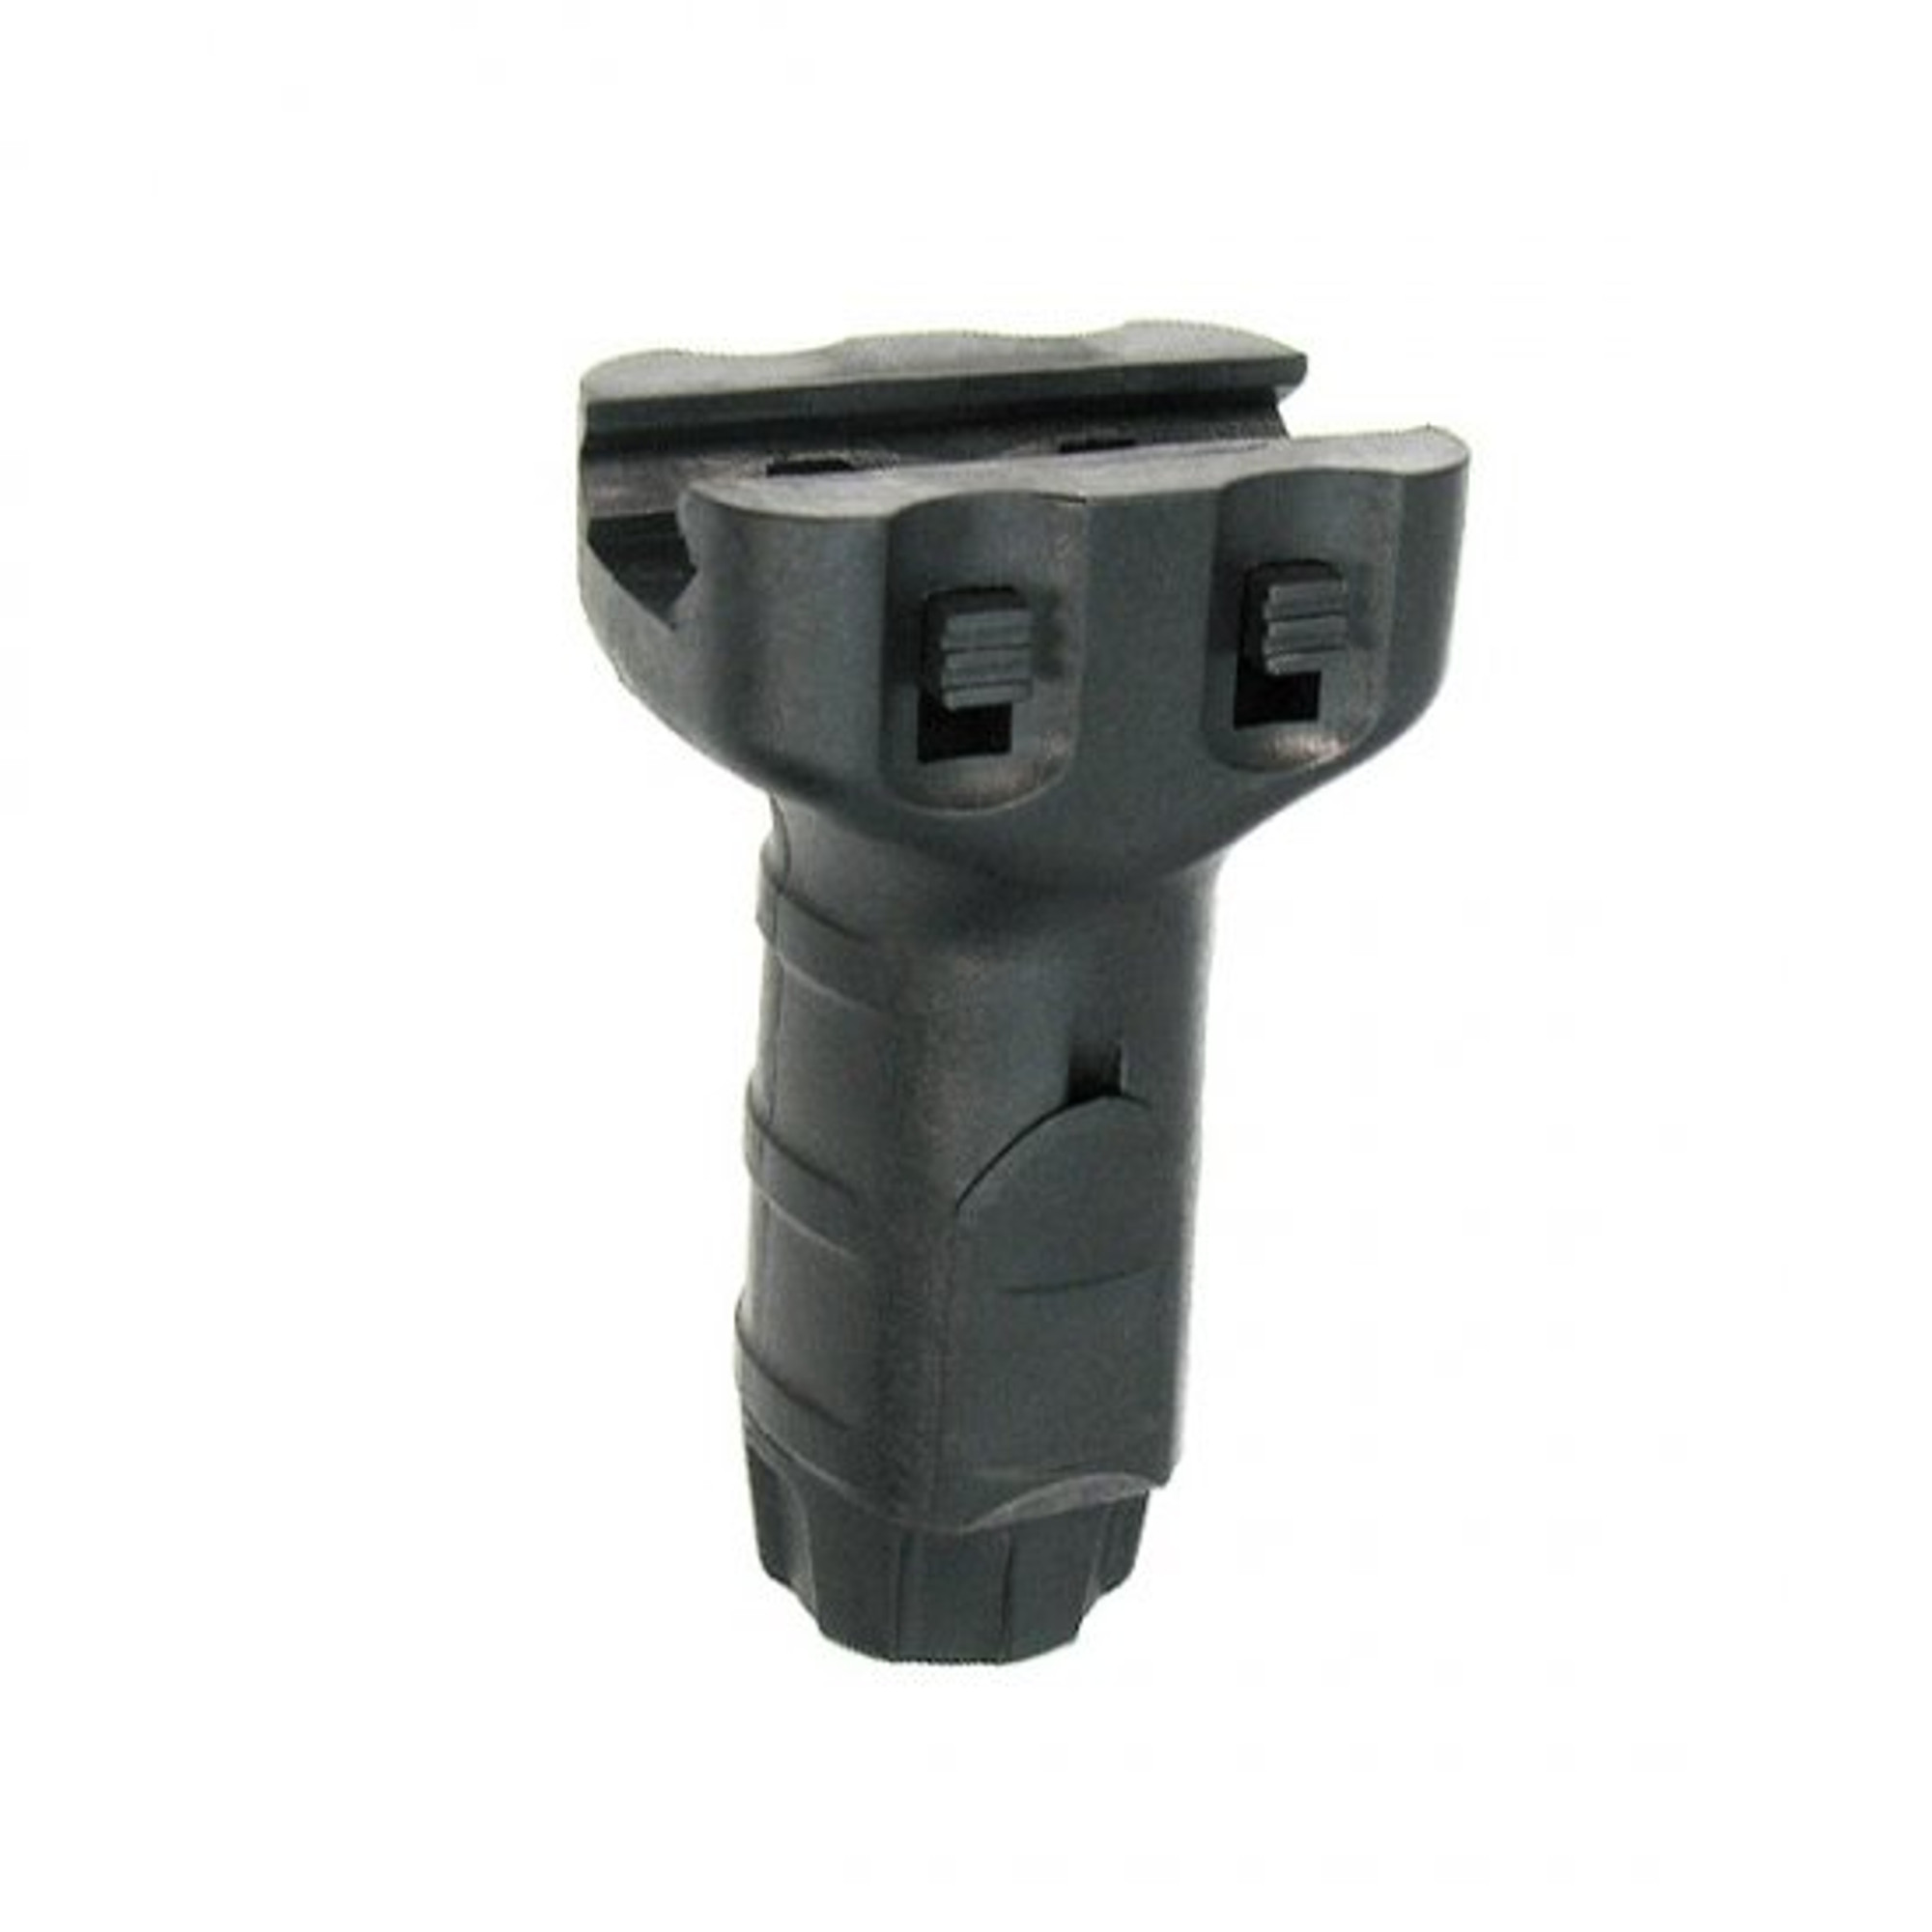 King Arms Vertical Fore Grip Shorty - Black